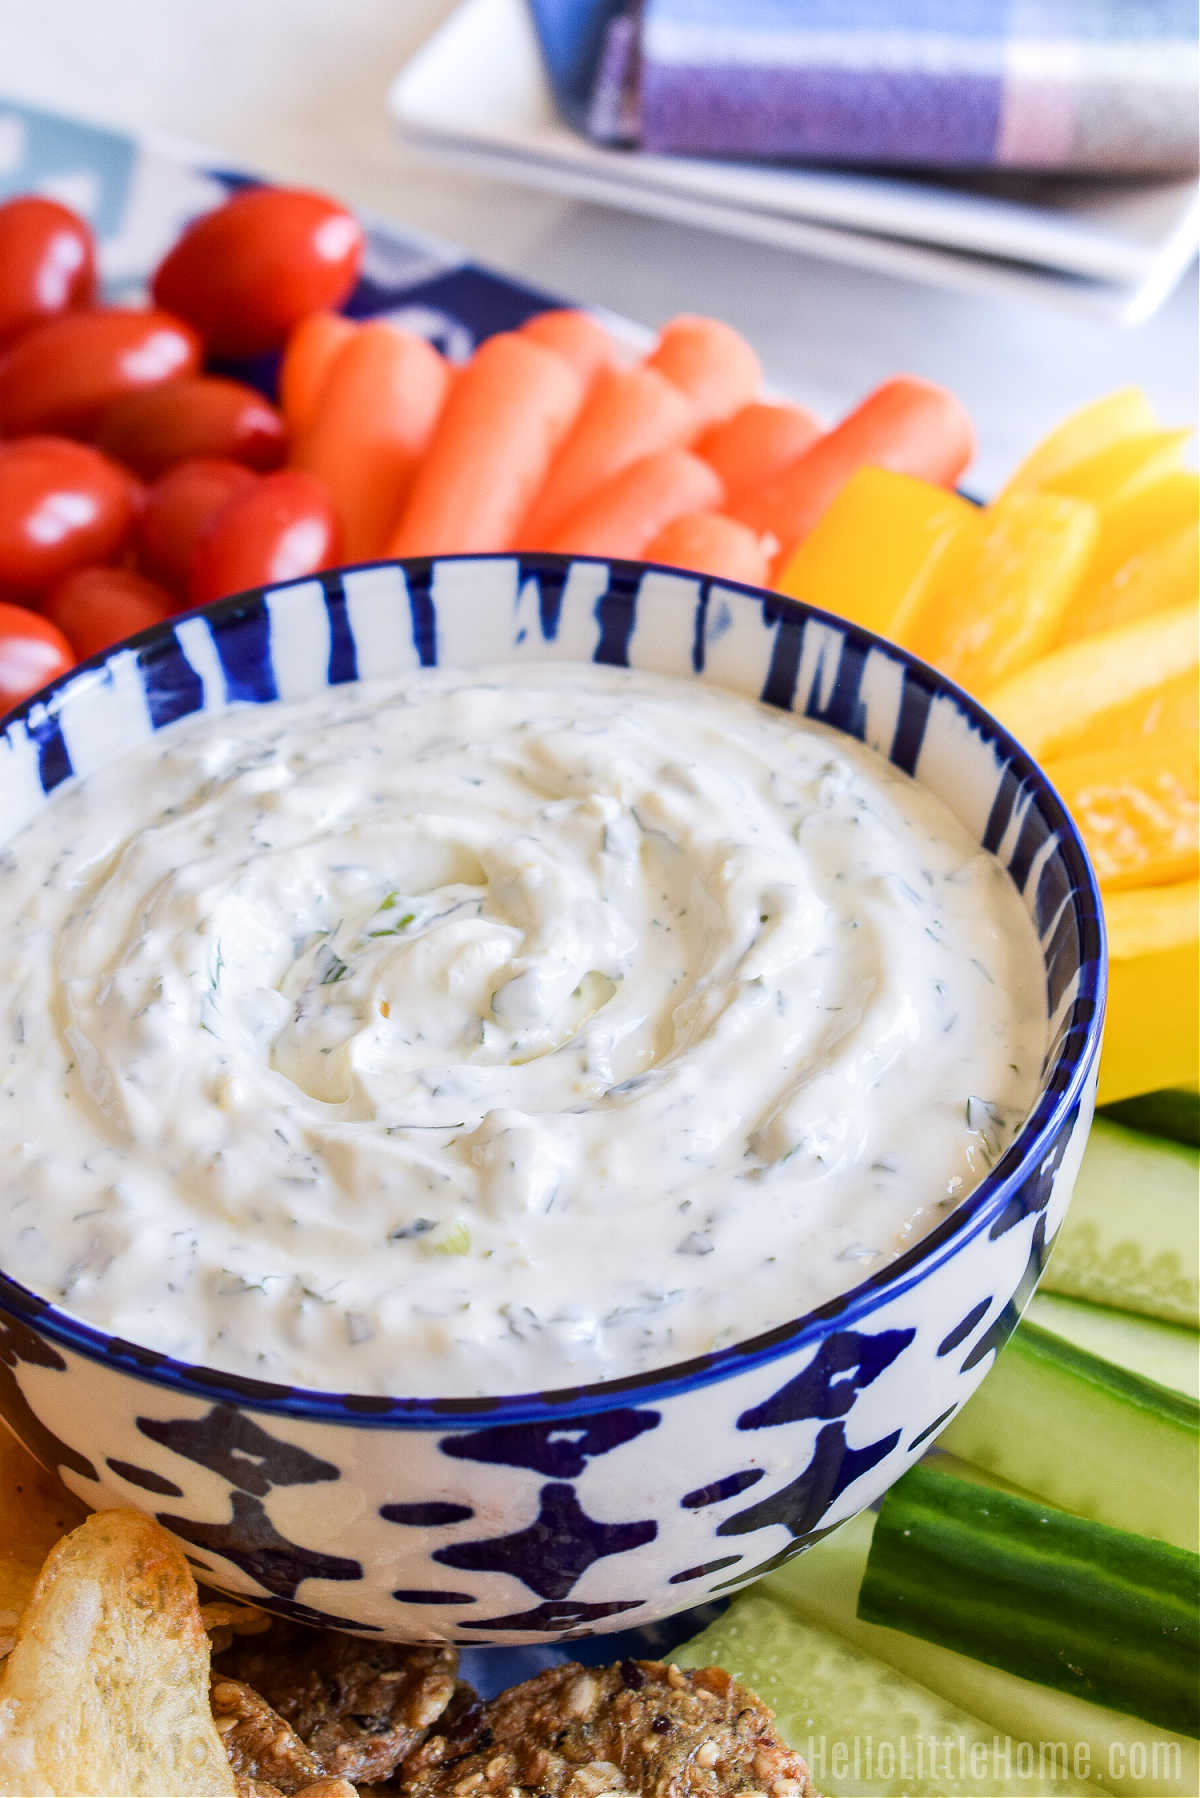 A bowl of Garlic Herb Dip with veggies and plates in the background.